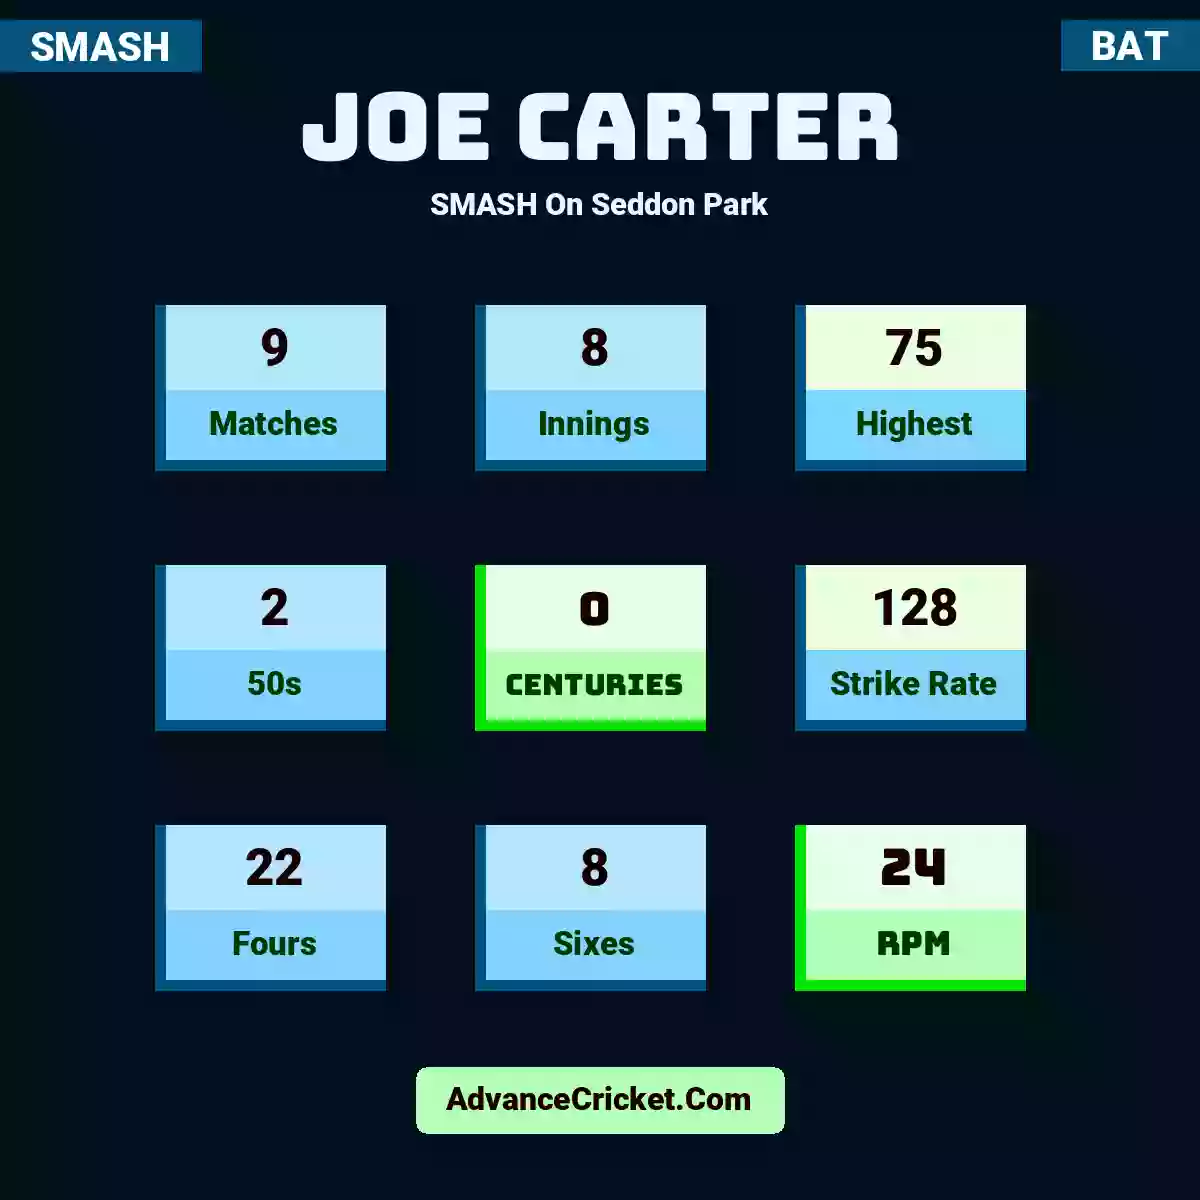 Joe Carter SMASH  On Seddon Park, Joe Carter played 9 matches, scored 75 runs as highest, 2 half-centuries, and 0 centuries, with a strike rate of 128. J.Carter hit 22 fours and 8 sixes, with an RPM of 24.